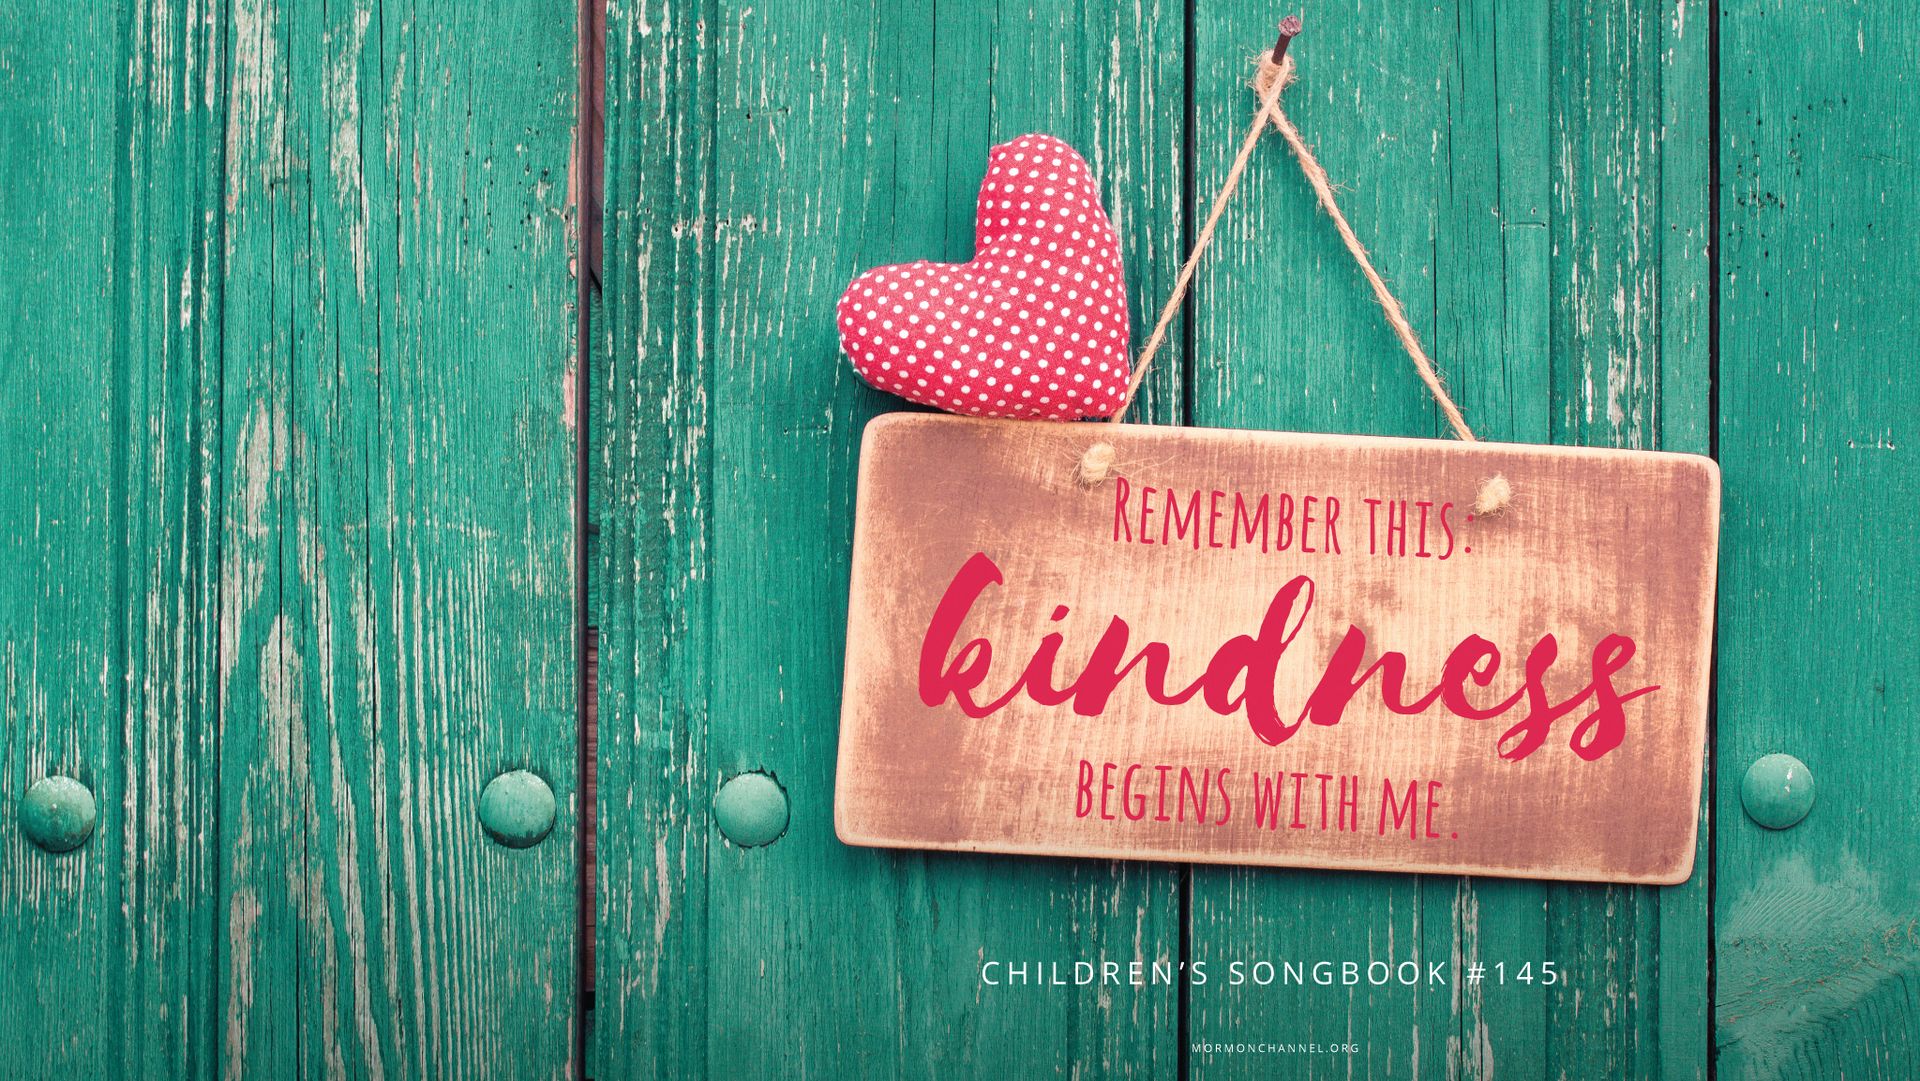 “Remember this: kindness begins with me.”—Children’s Songbook, 145